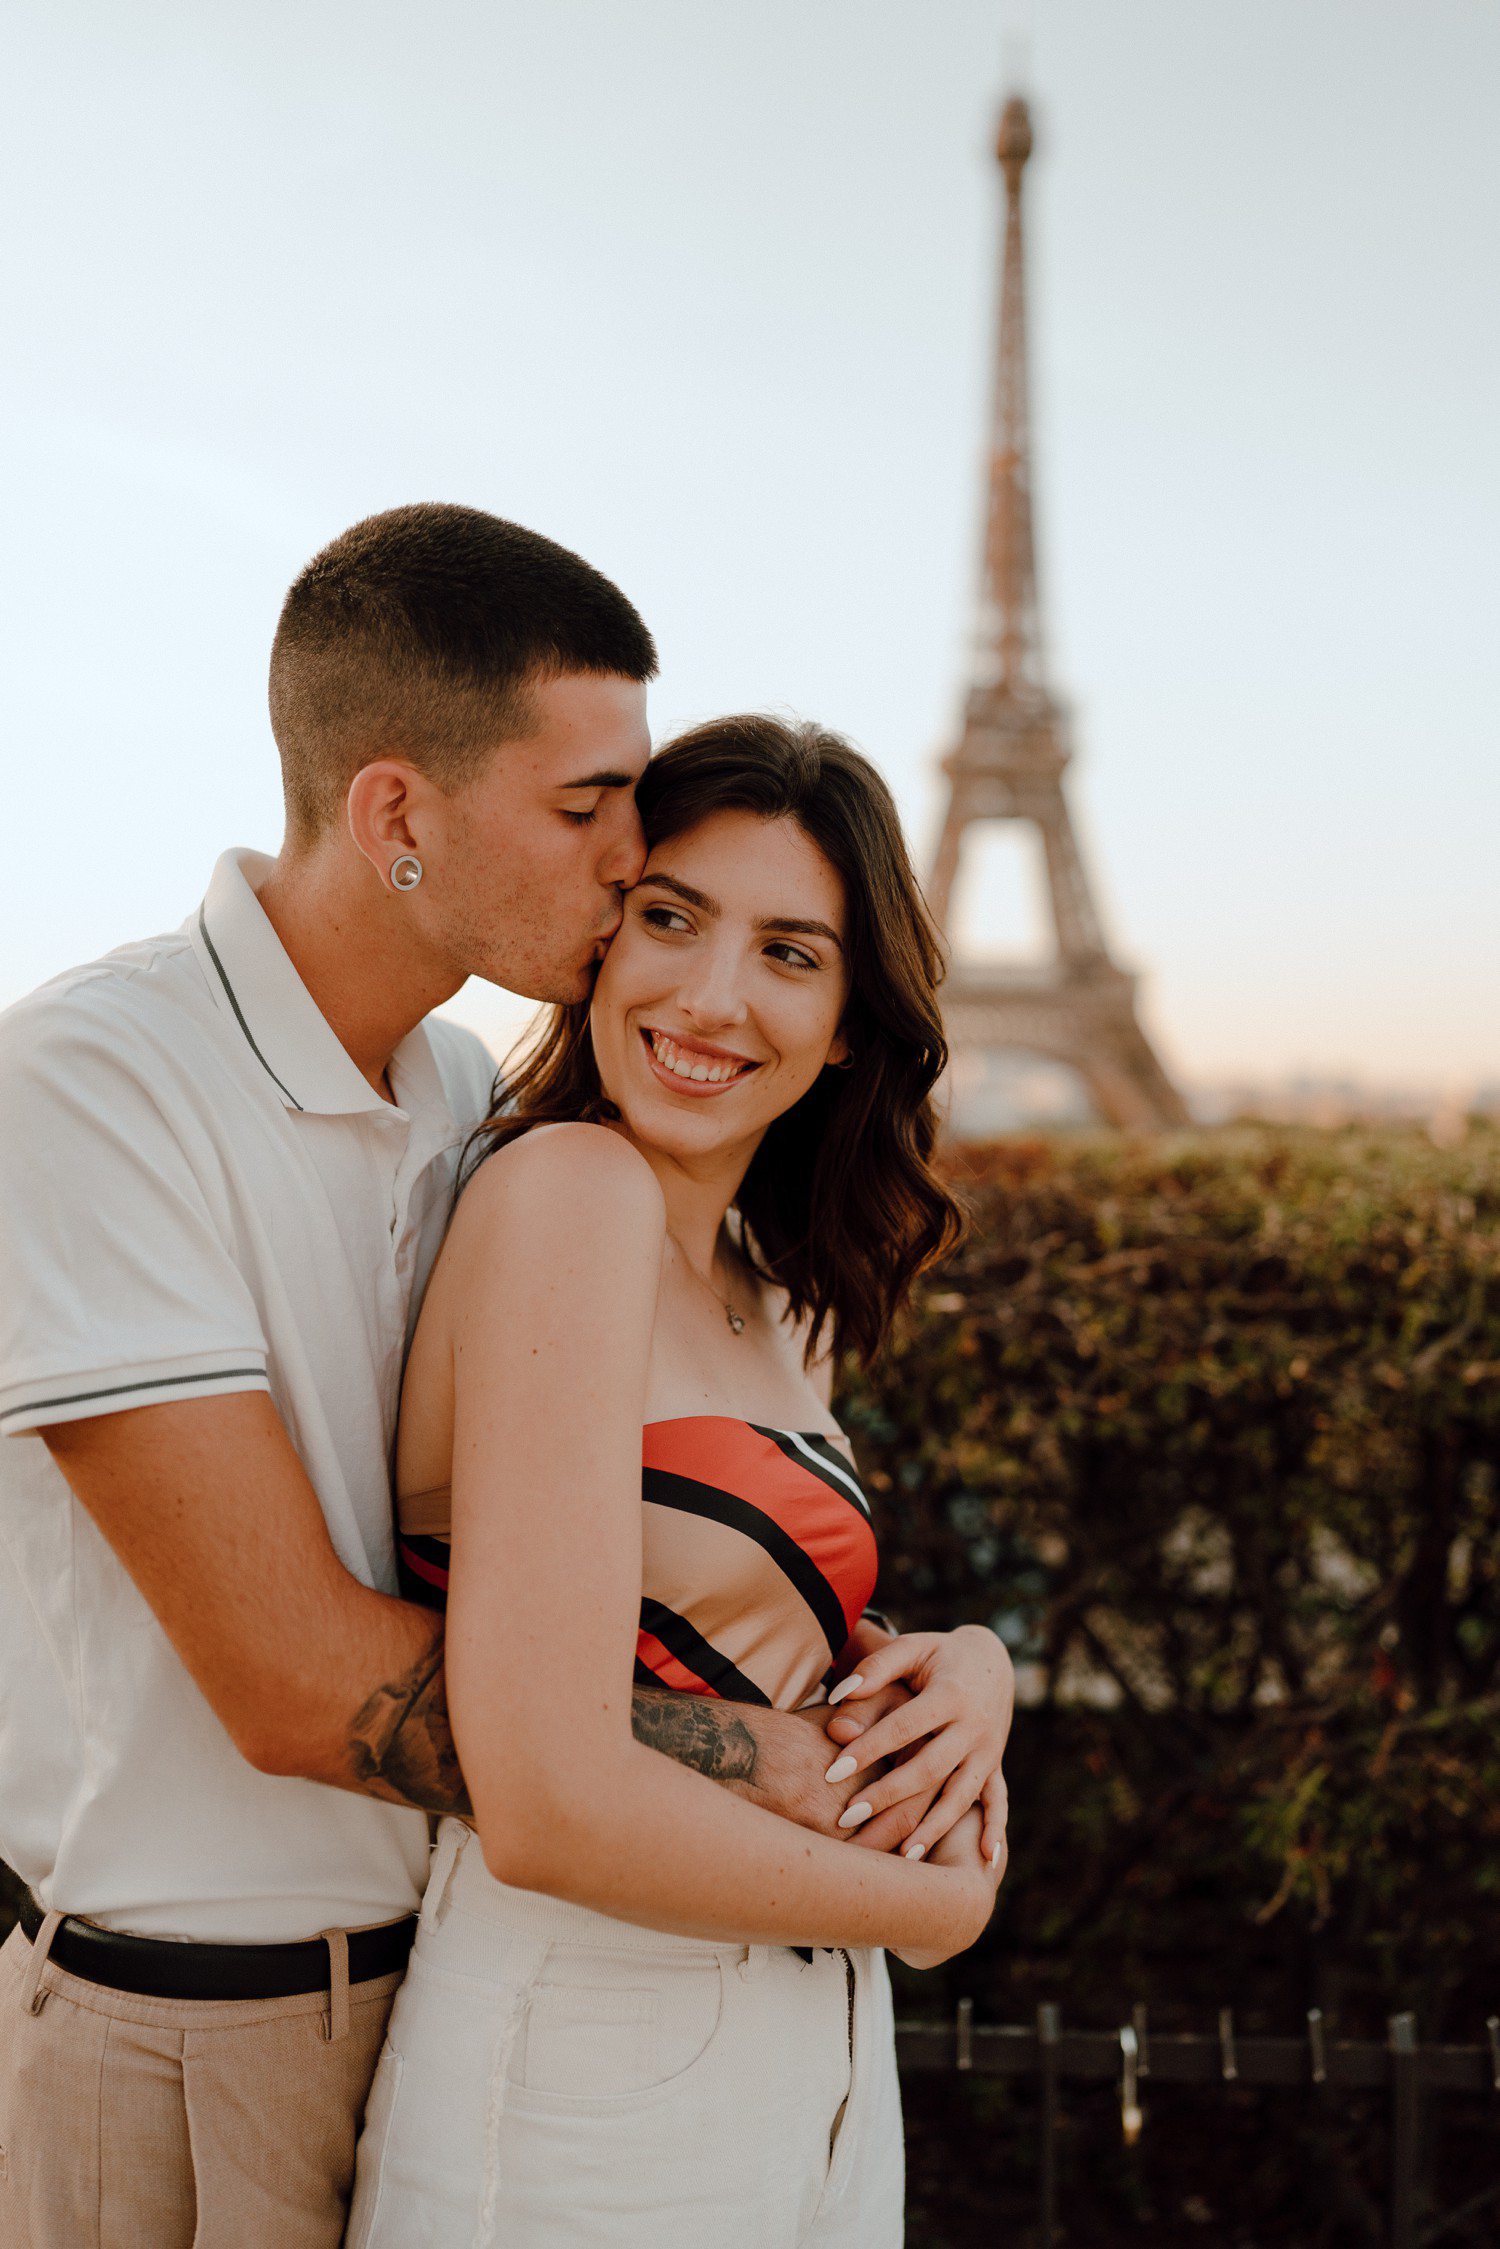 Couples Session in Paris France at The Eiffel Tower